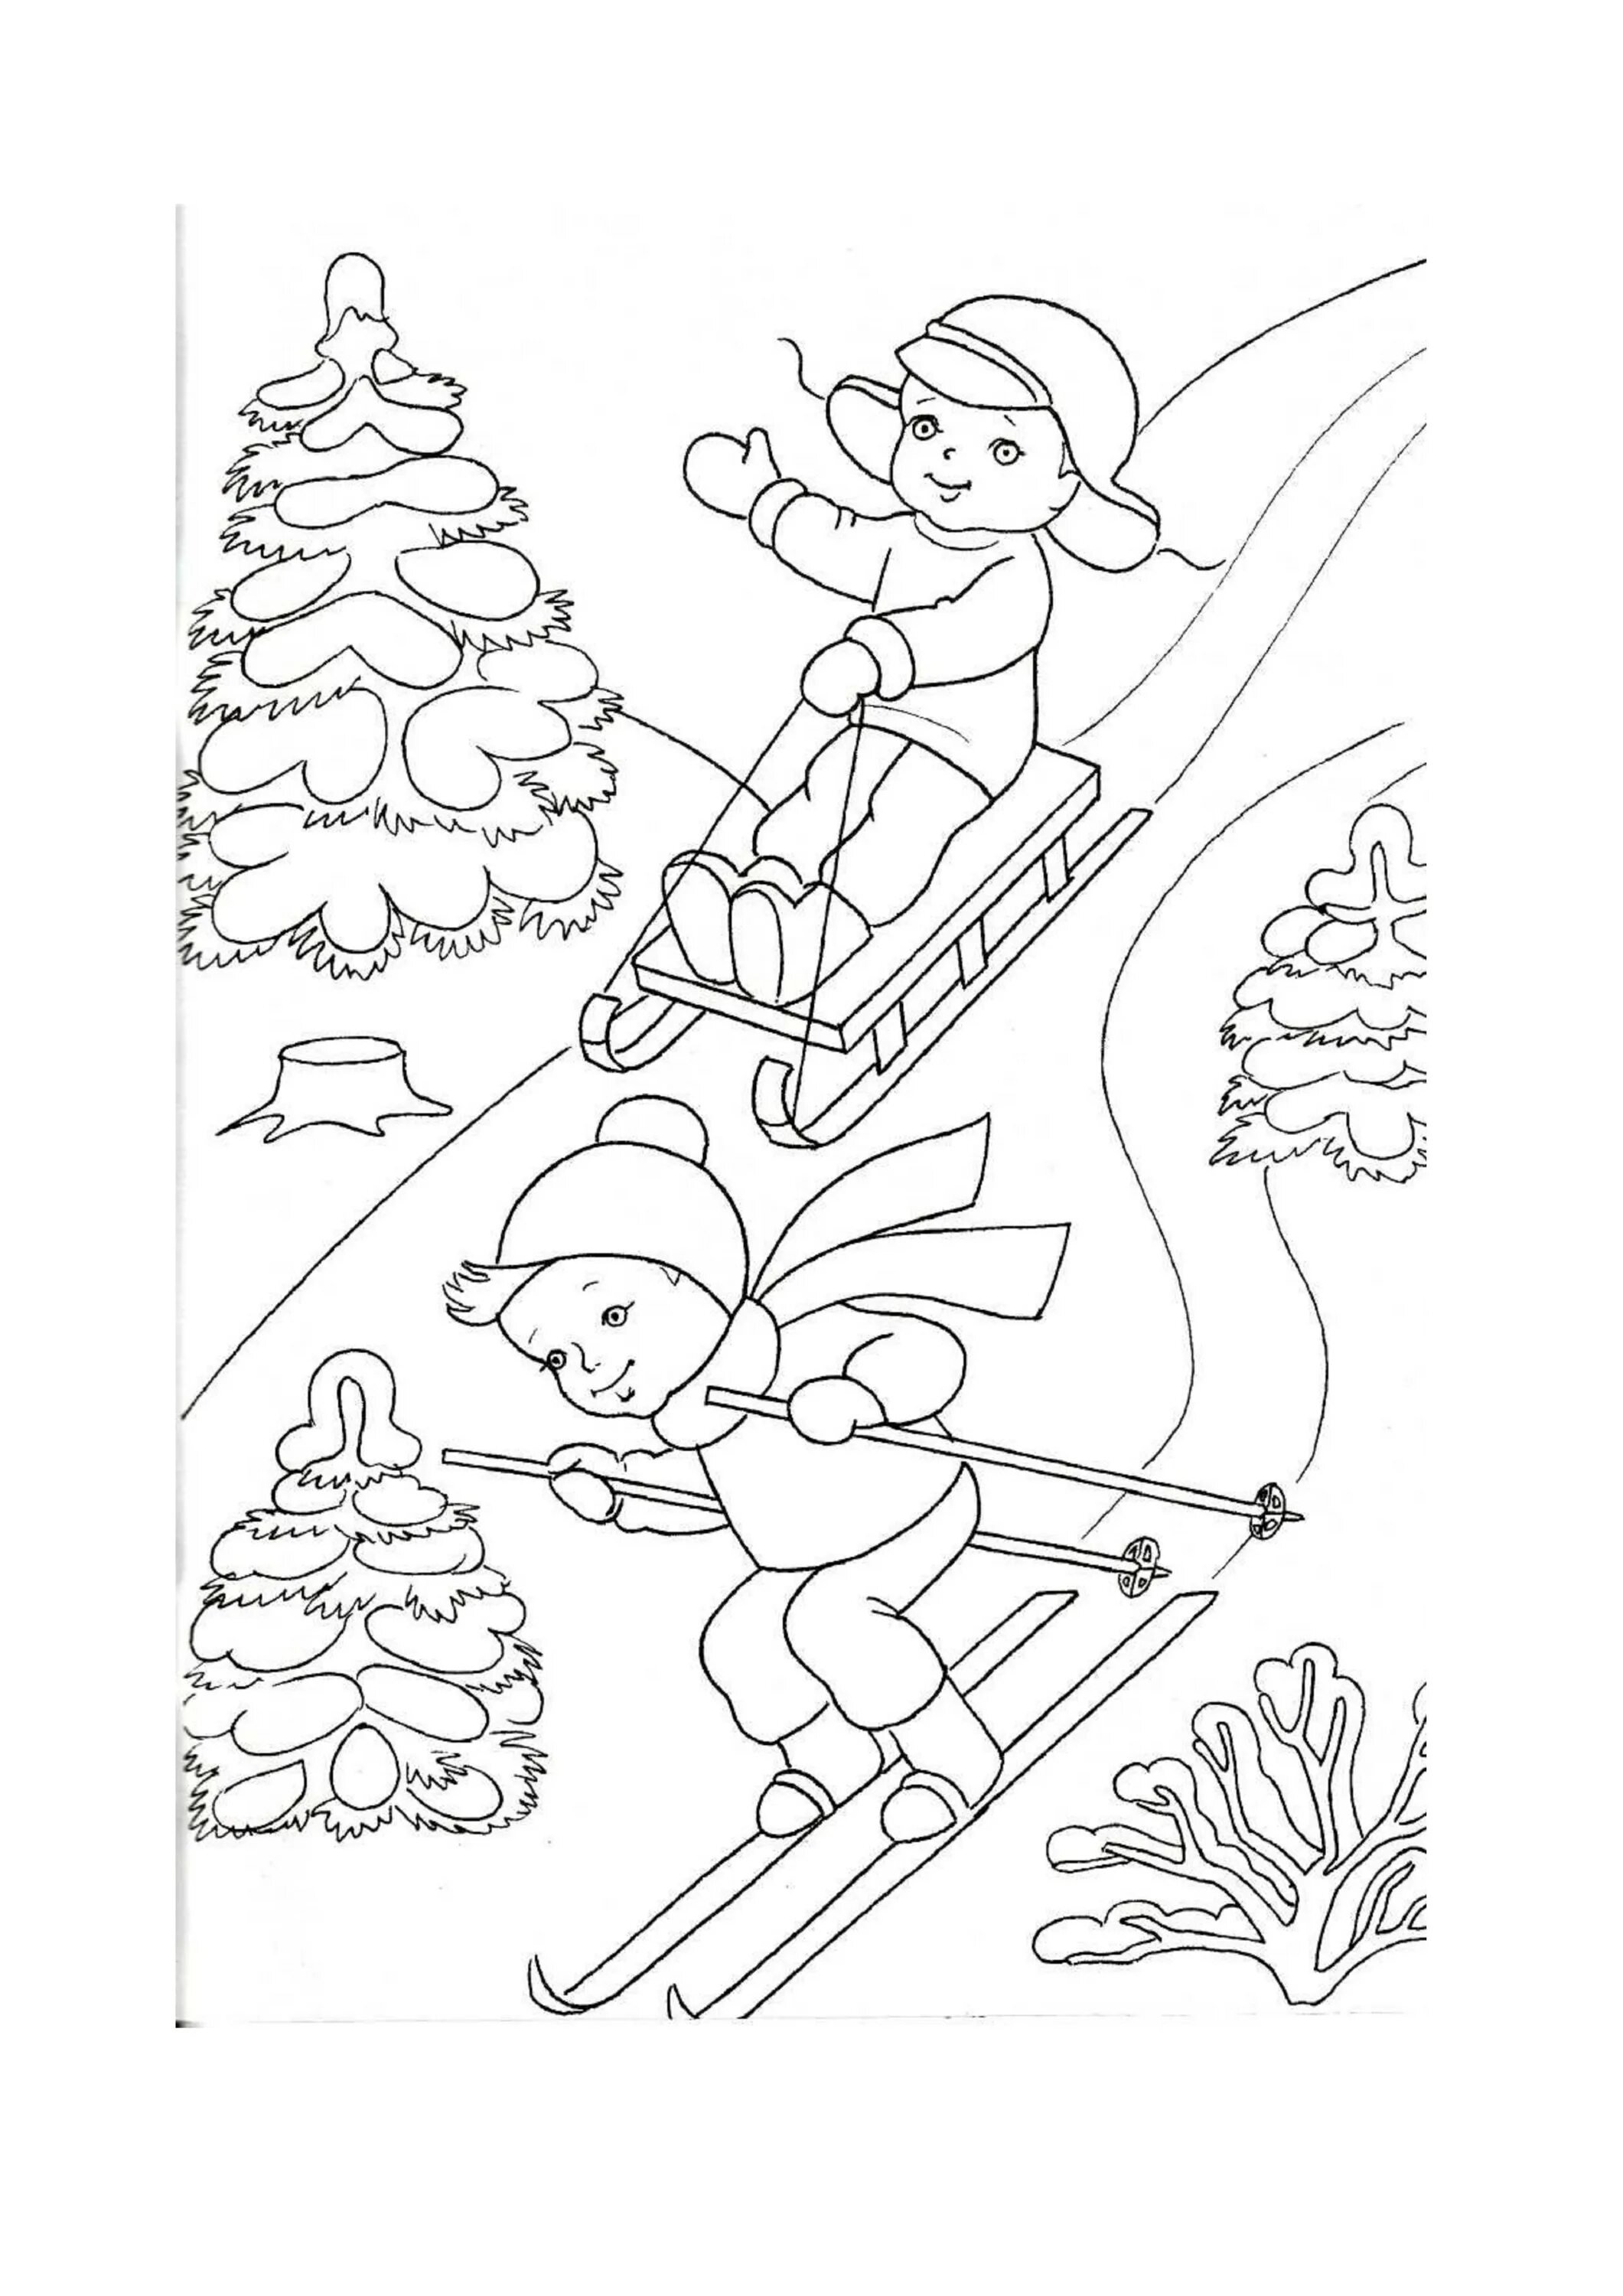 Glamorous snow slide coloring page